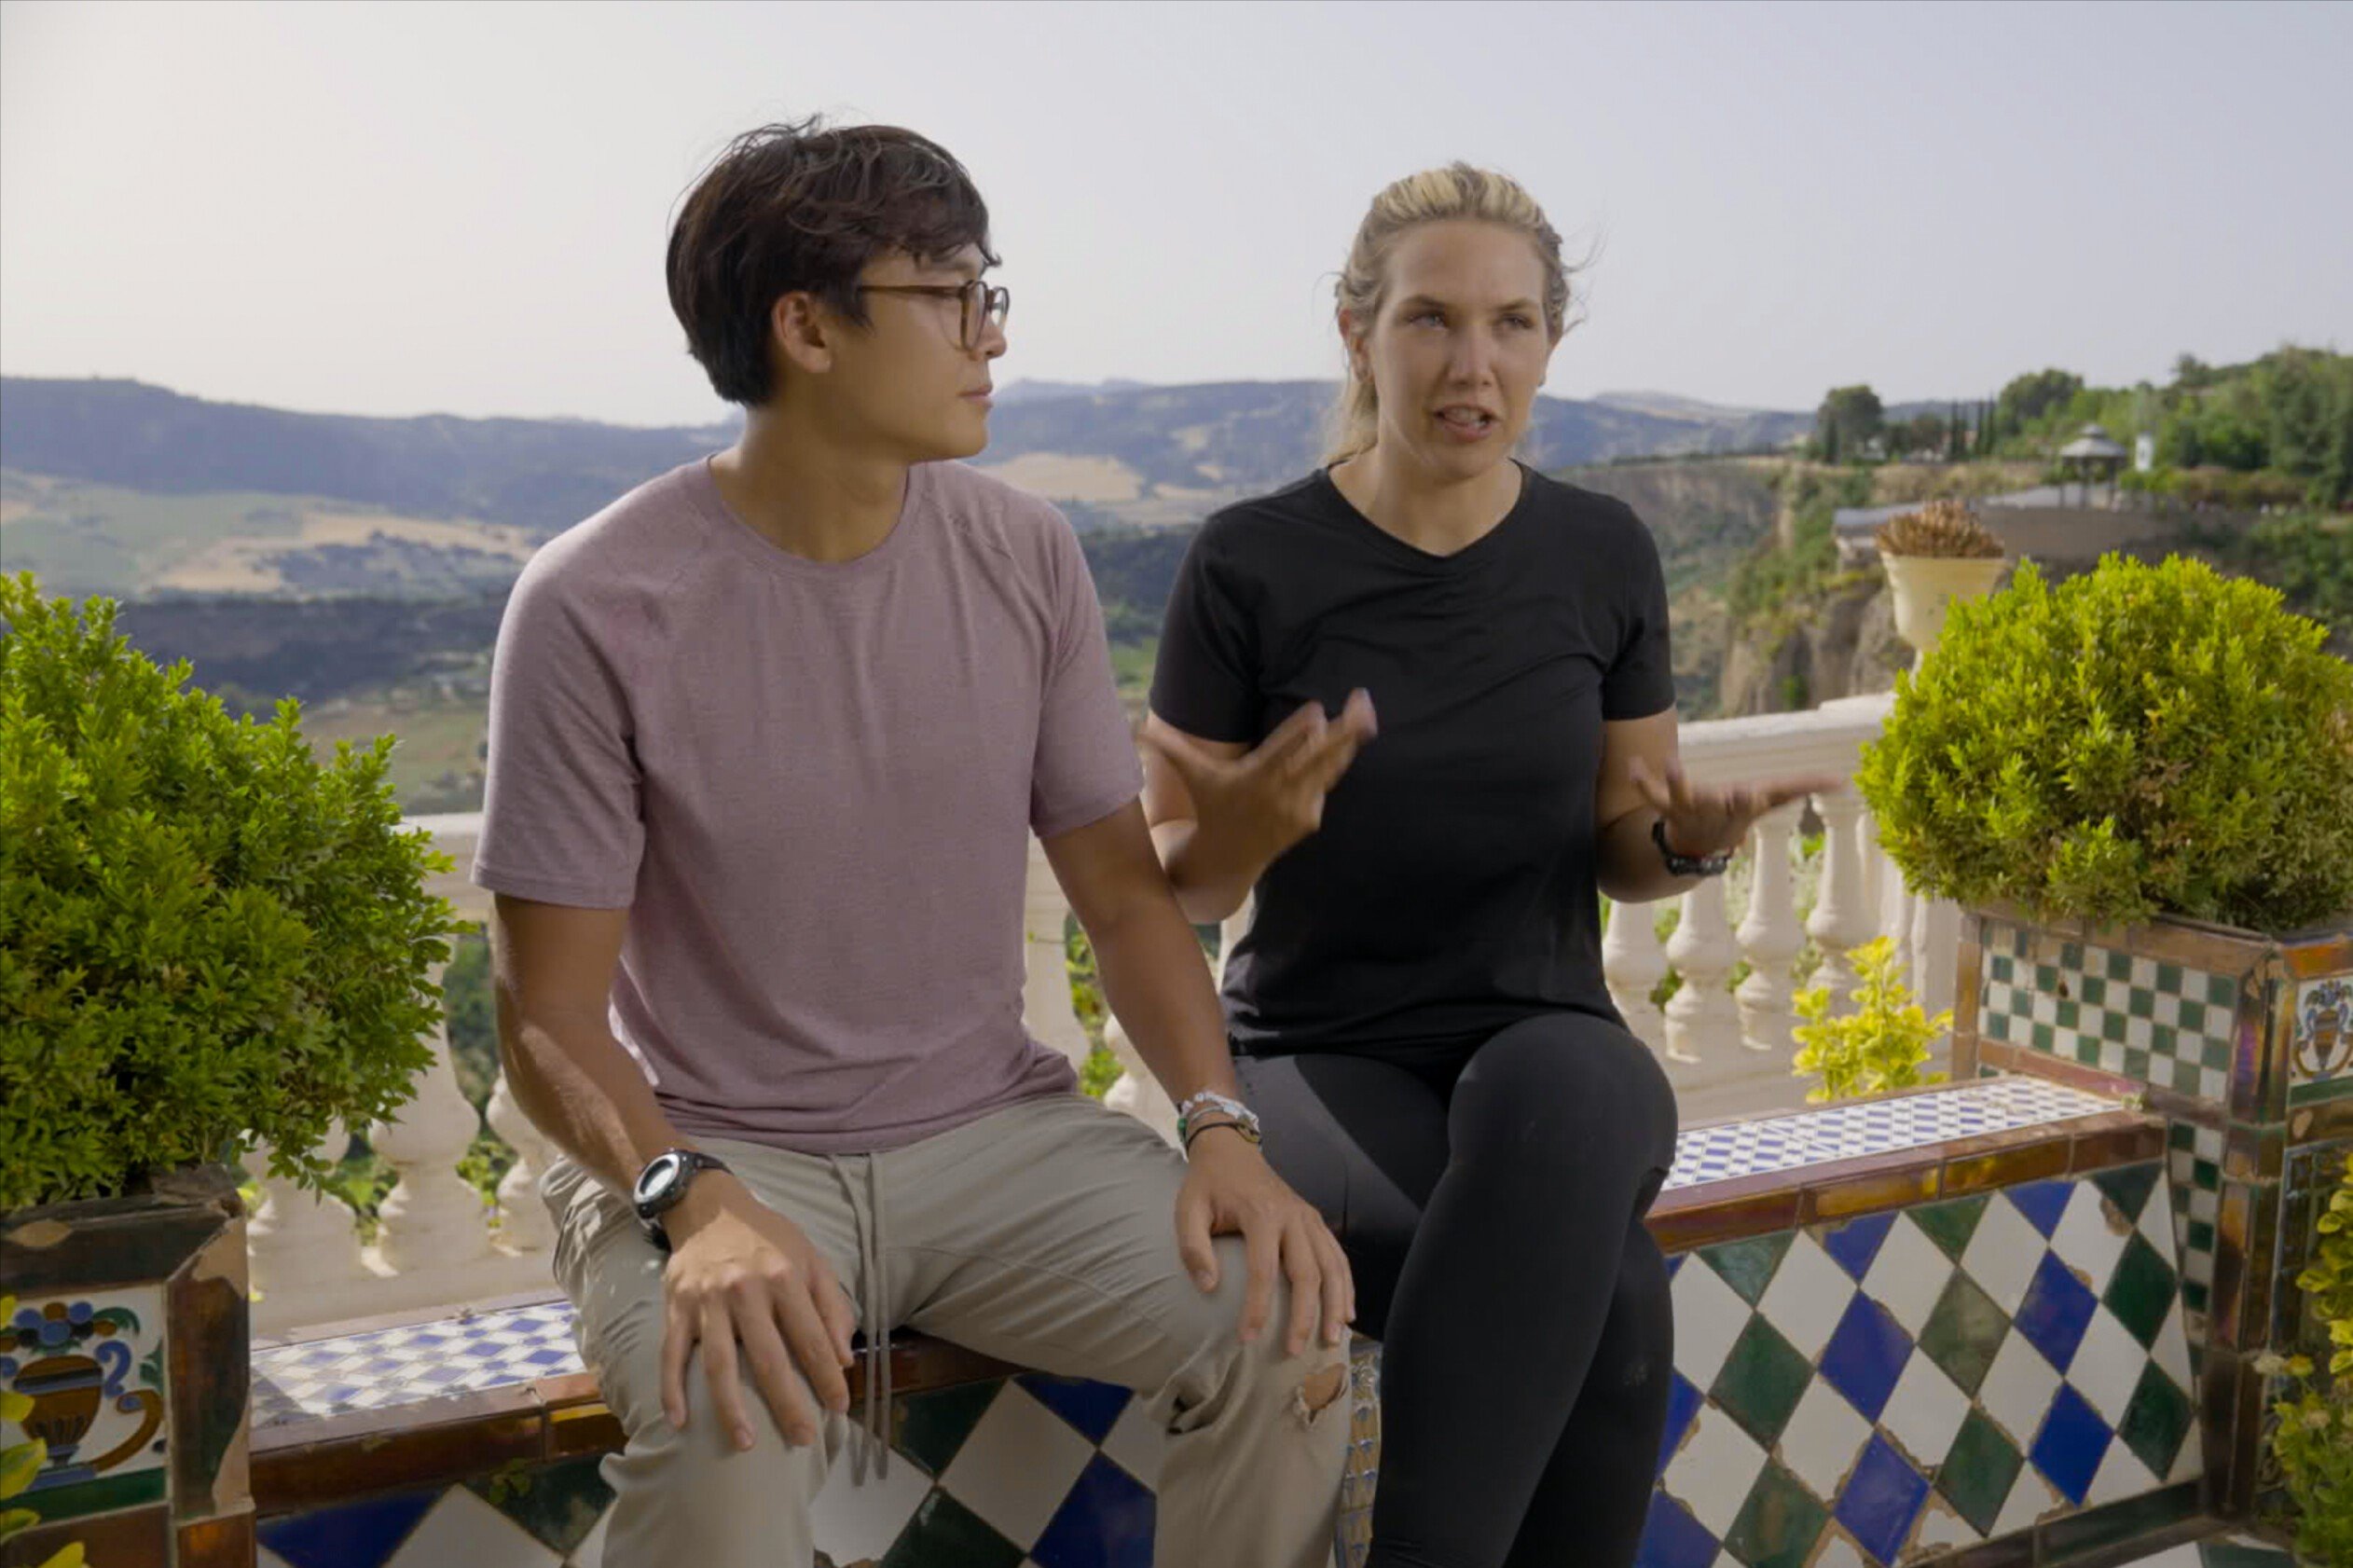 Derek Xiao and Claire Rehfuss, who will compete in 'The Amazing Race 34' Episode 11 on CBS, film a confessional. Derek wears a light purple shirt and tan pants. Claire wears a black shirt and black leggings.